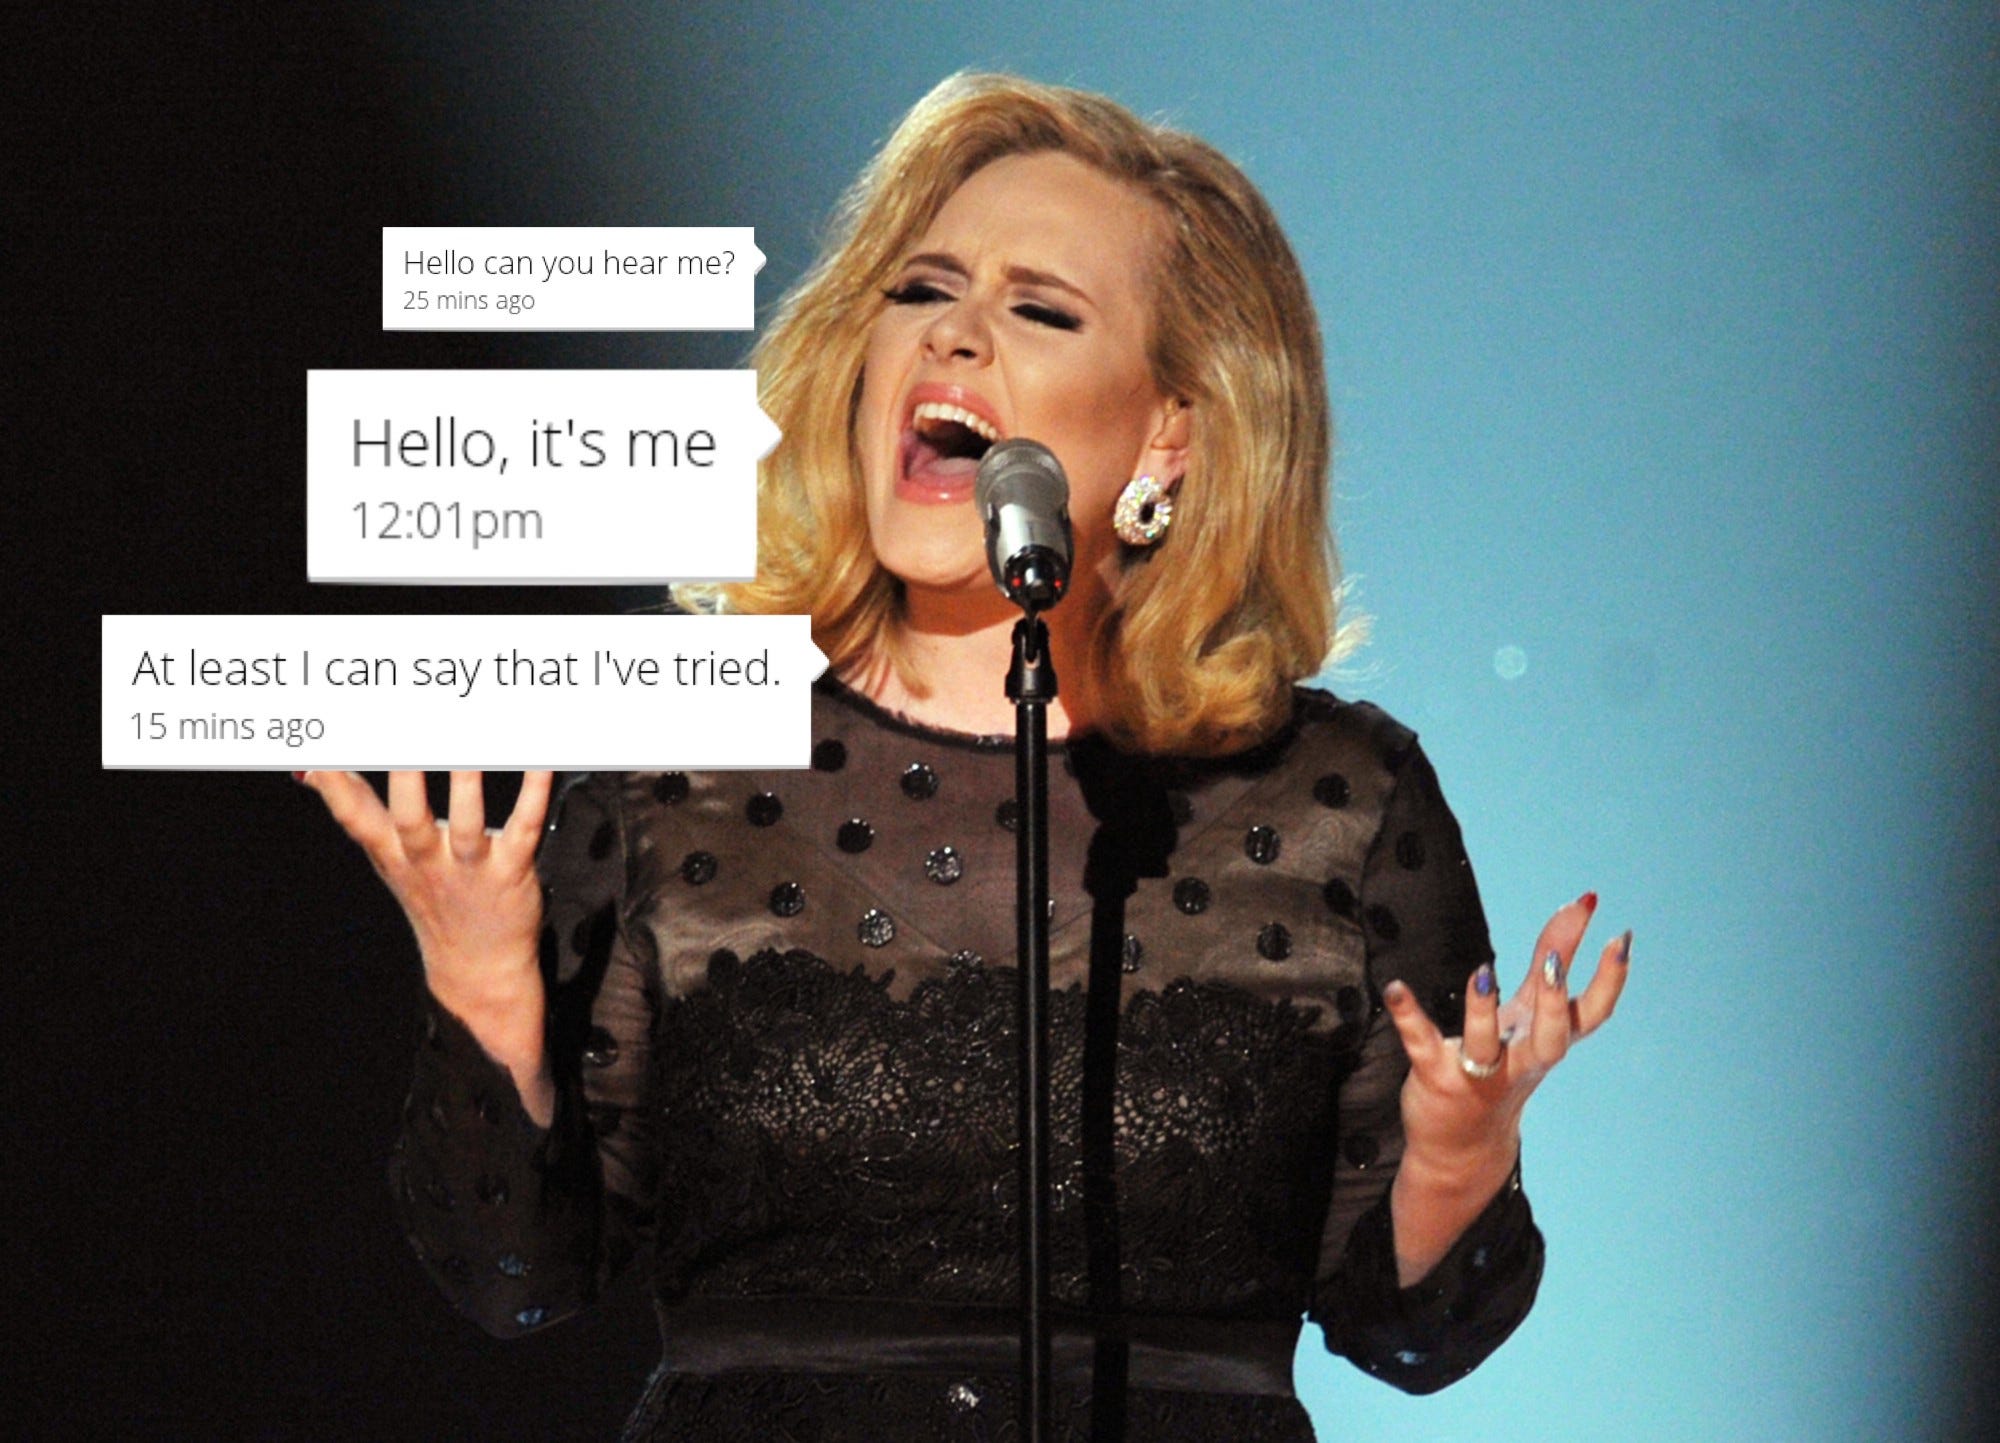 I Trolled My Tinder Matches With Lyrics From Adele’s “Hello”2000 x 1443